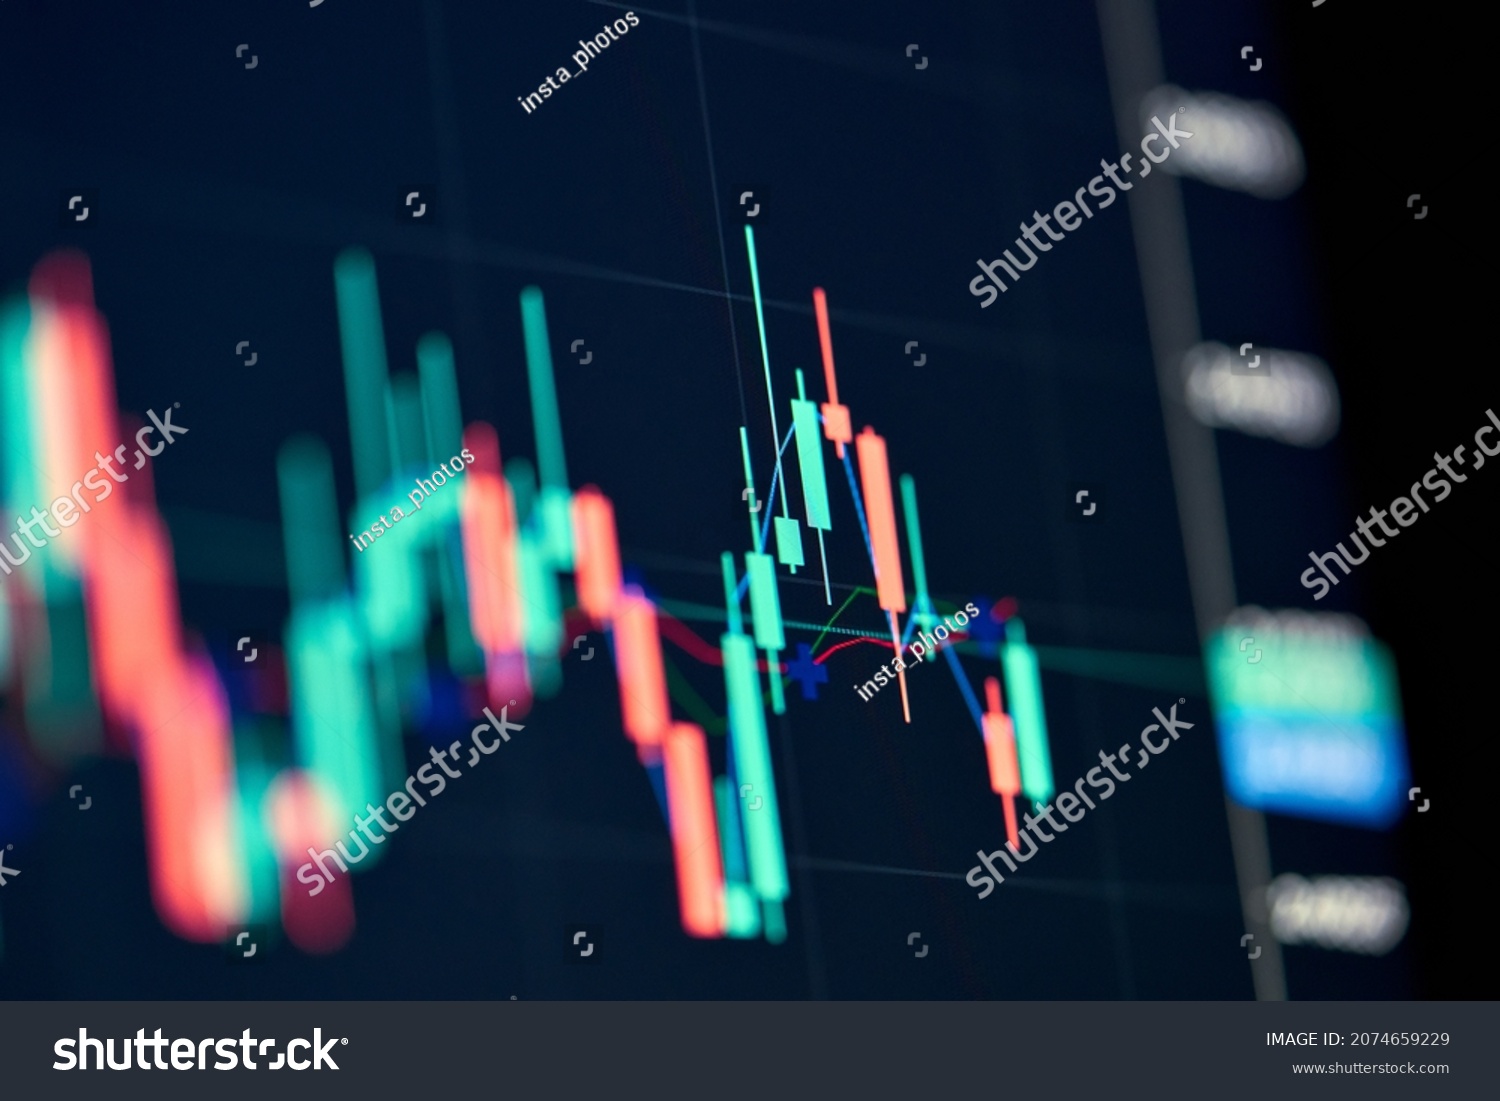 Stockmarket online trading chart candlestick on crypto currency platform. Stock exchange financial market price candles graph data pattern analysis concept. Computer screen closeup background #2074659229